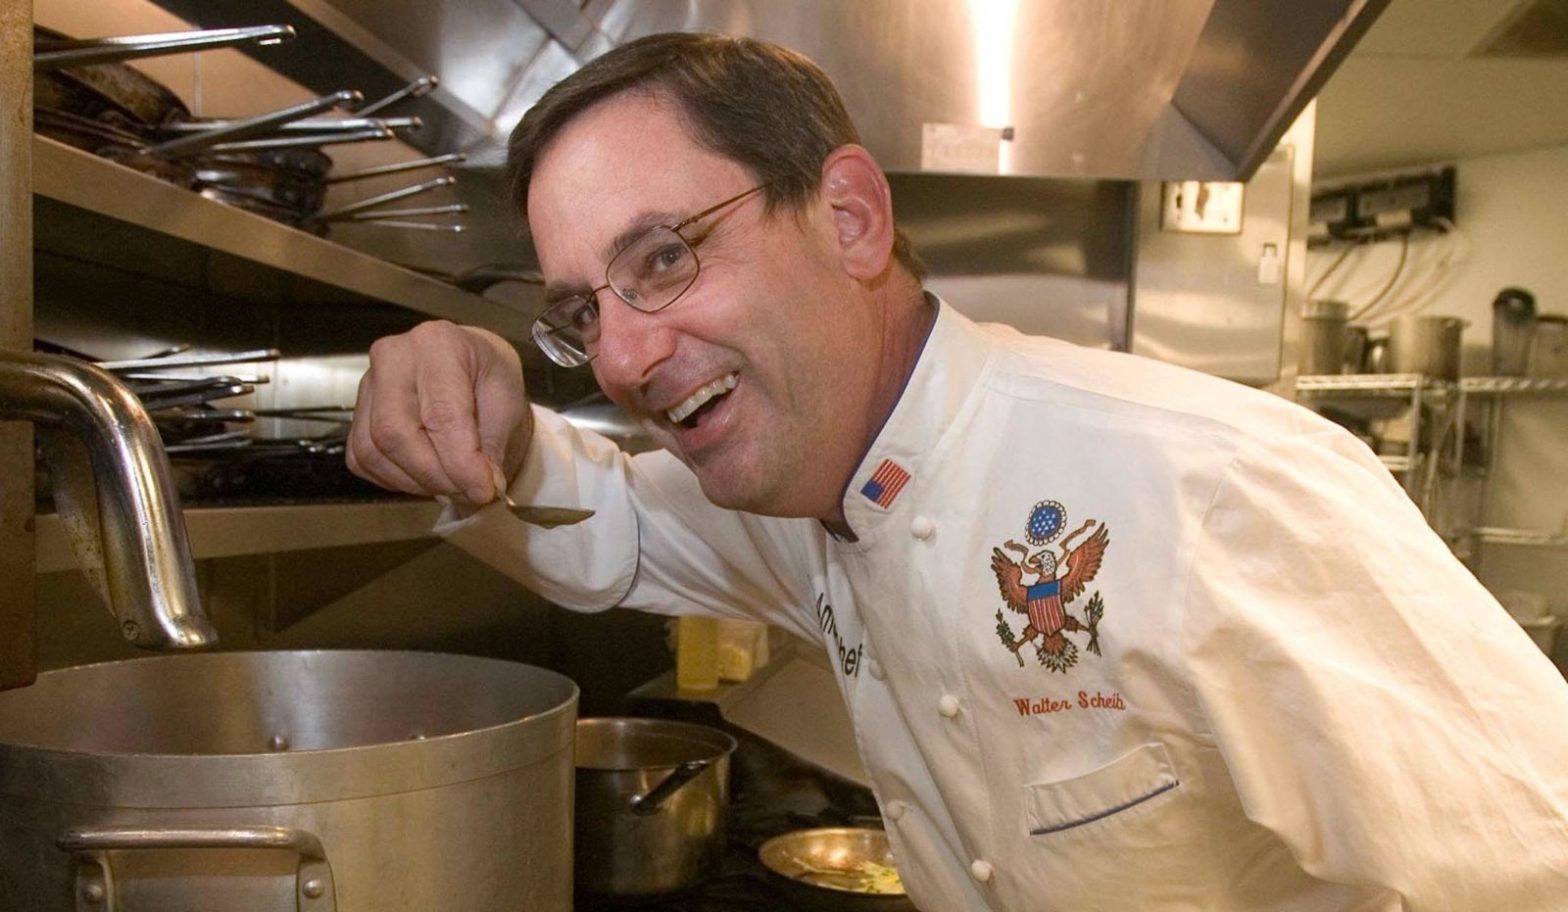 Who was Walter Scheib? Former White House executive chef died by drowning in 2015